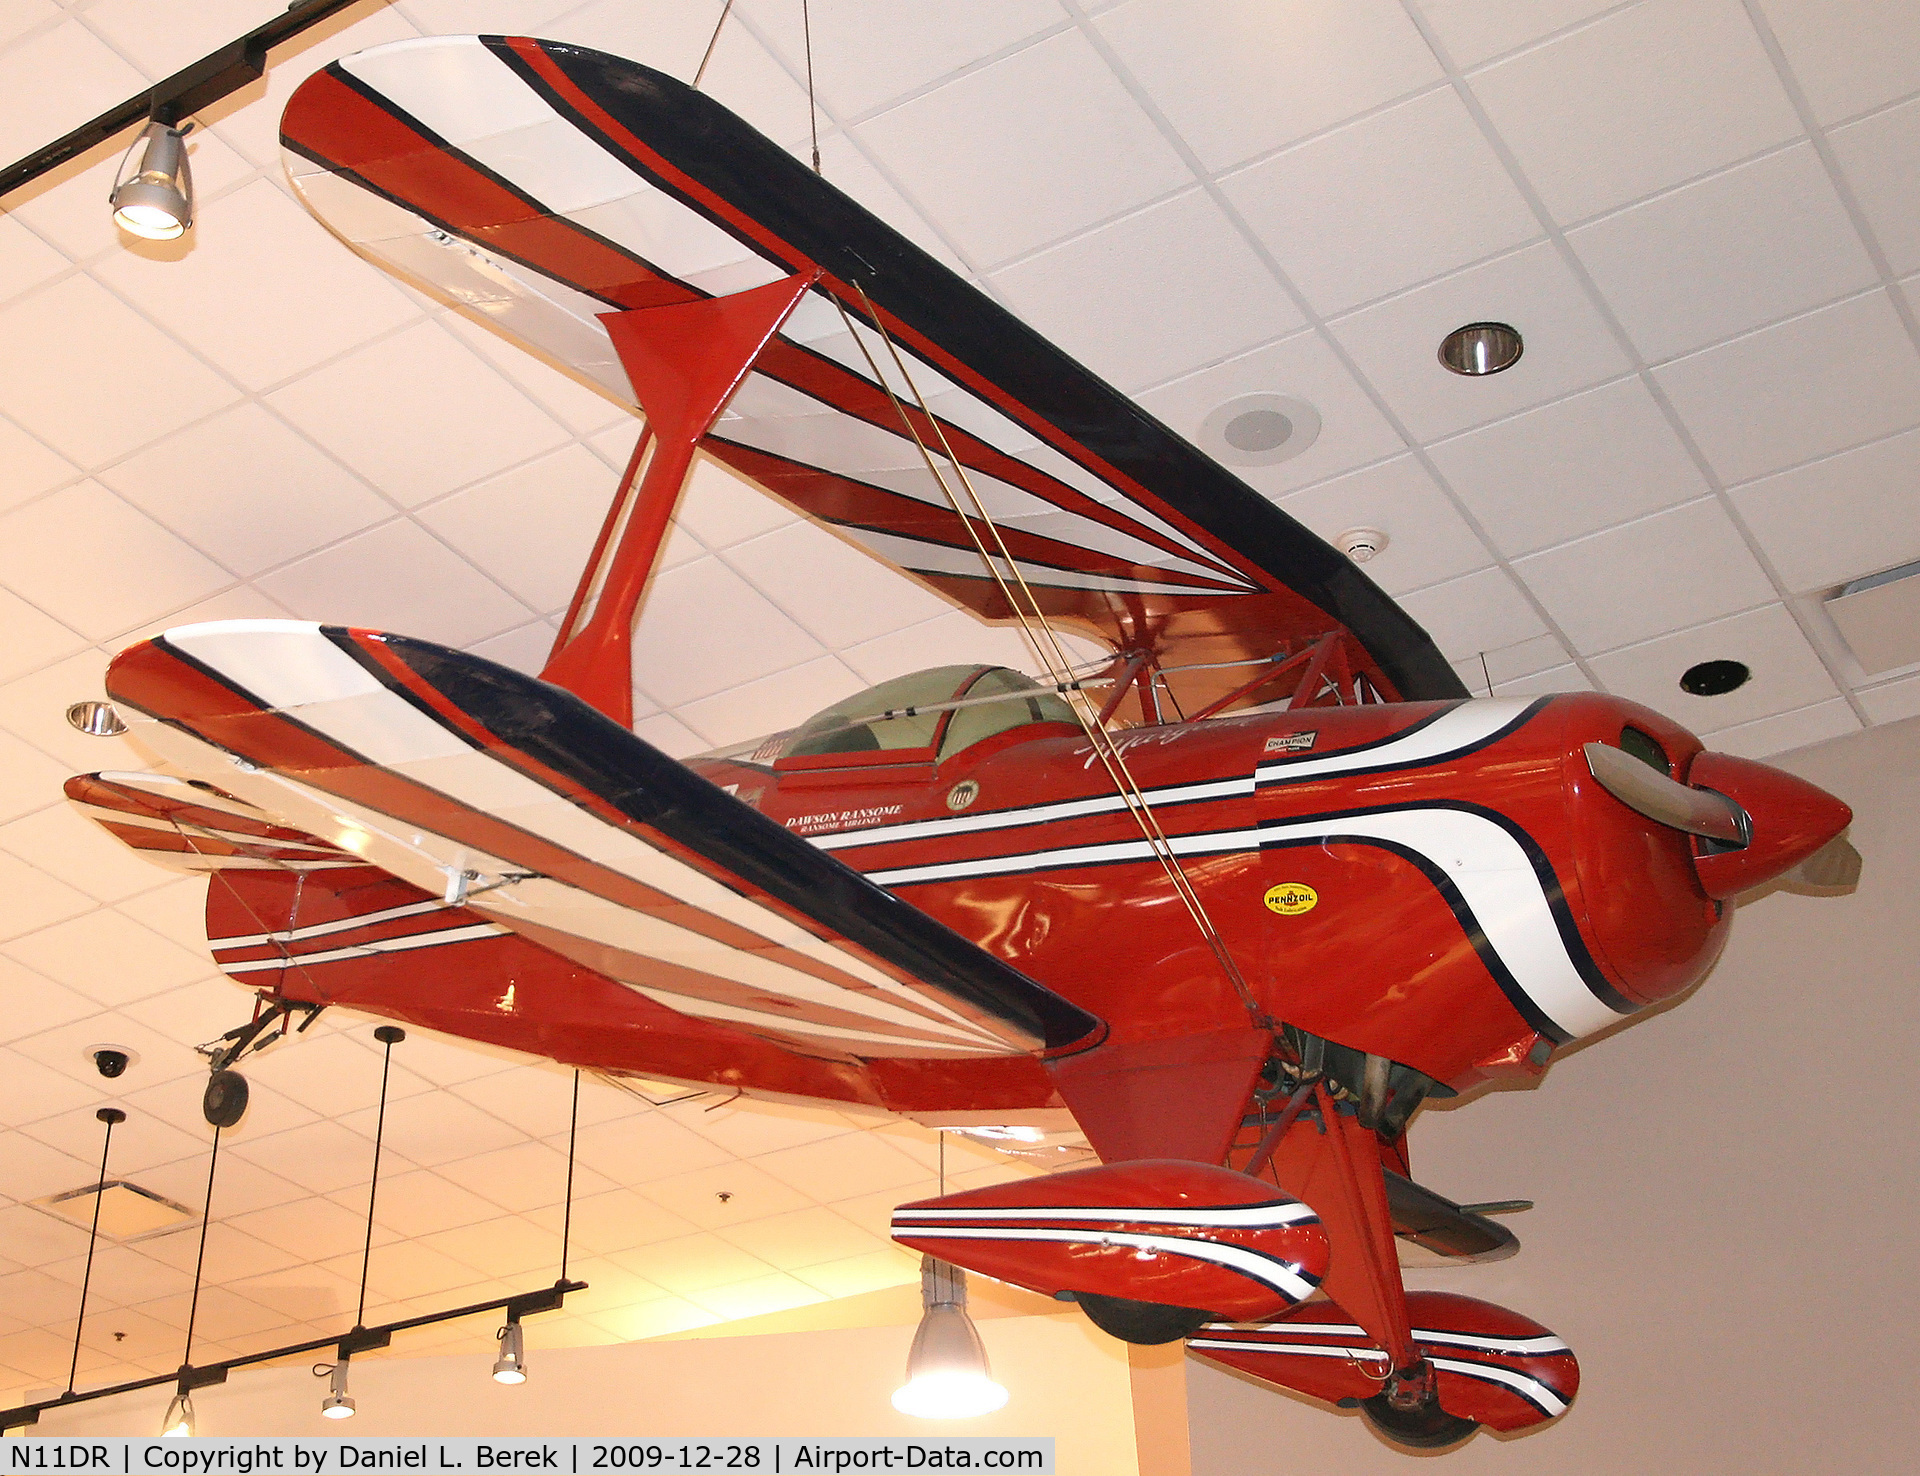 N11DR, 1969 Pitts S-1 Special C/N JDR2, This beauty now graces the gift shop at the National Air & Space Museum.